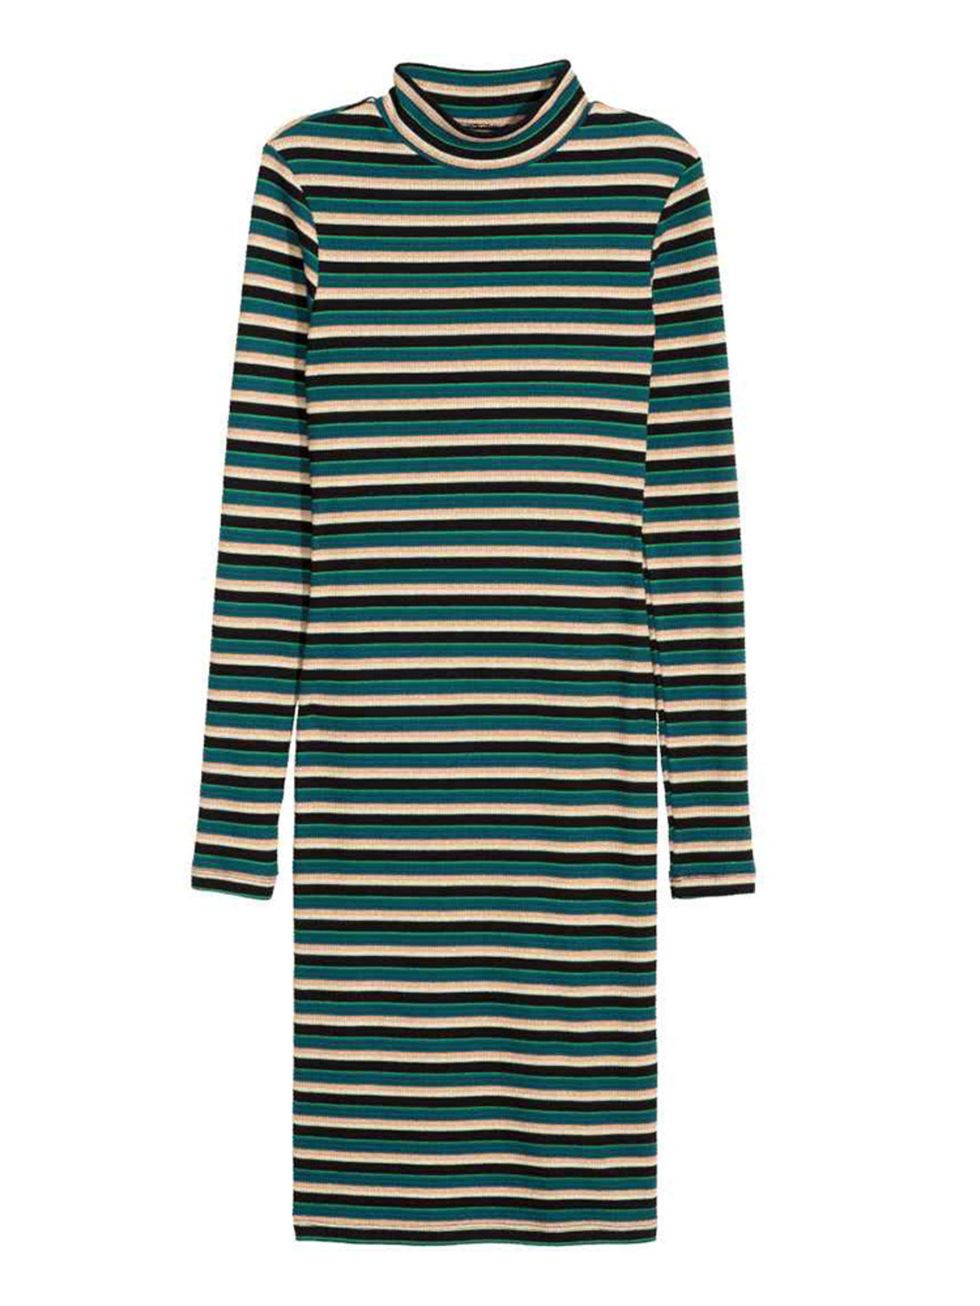 <p>Start simple. A striped dress is the easiest way to wear head-to-toe stripes. </p>

<p>Dress, £29.99, <a href="http://www2.hm.com/en_gb/productpage.0351851004.html" target="_blank">H&M</a></p>